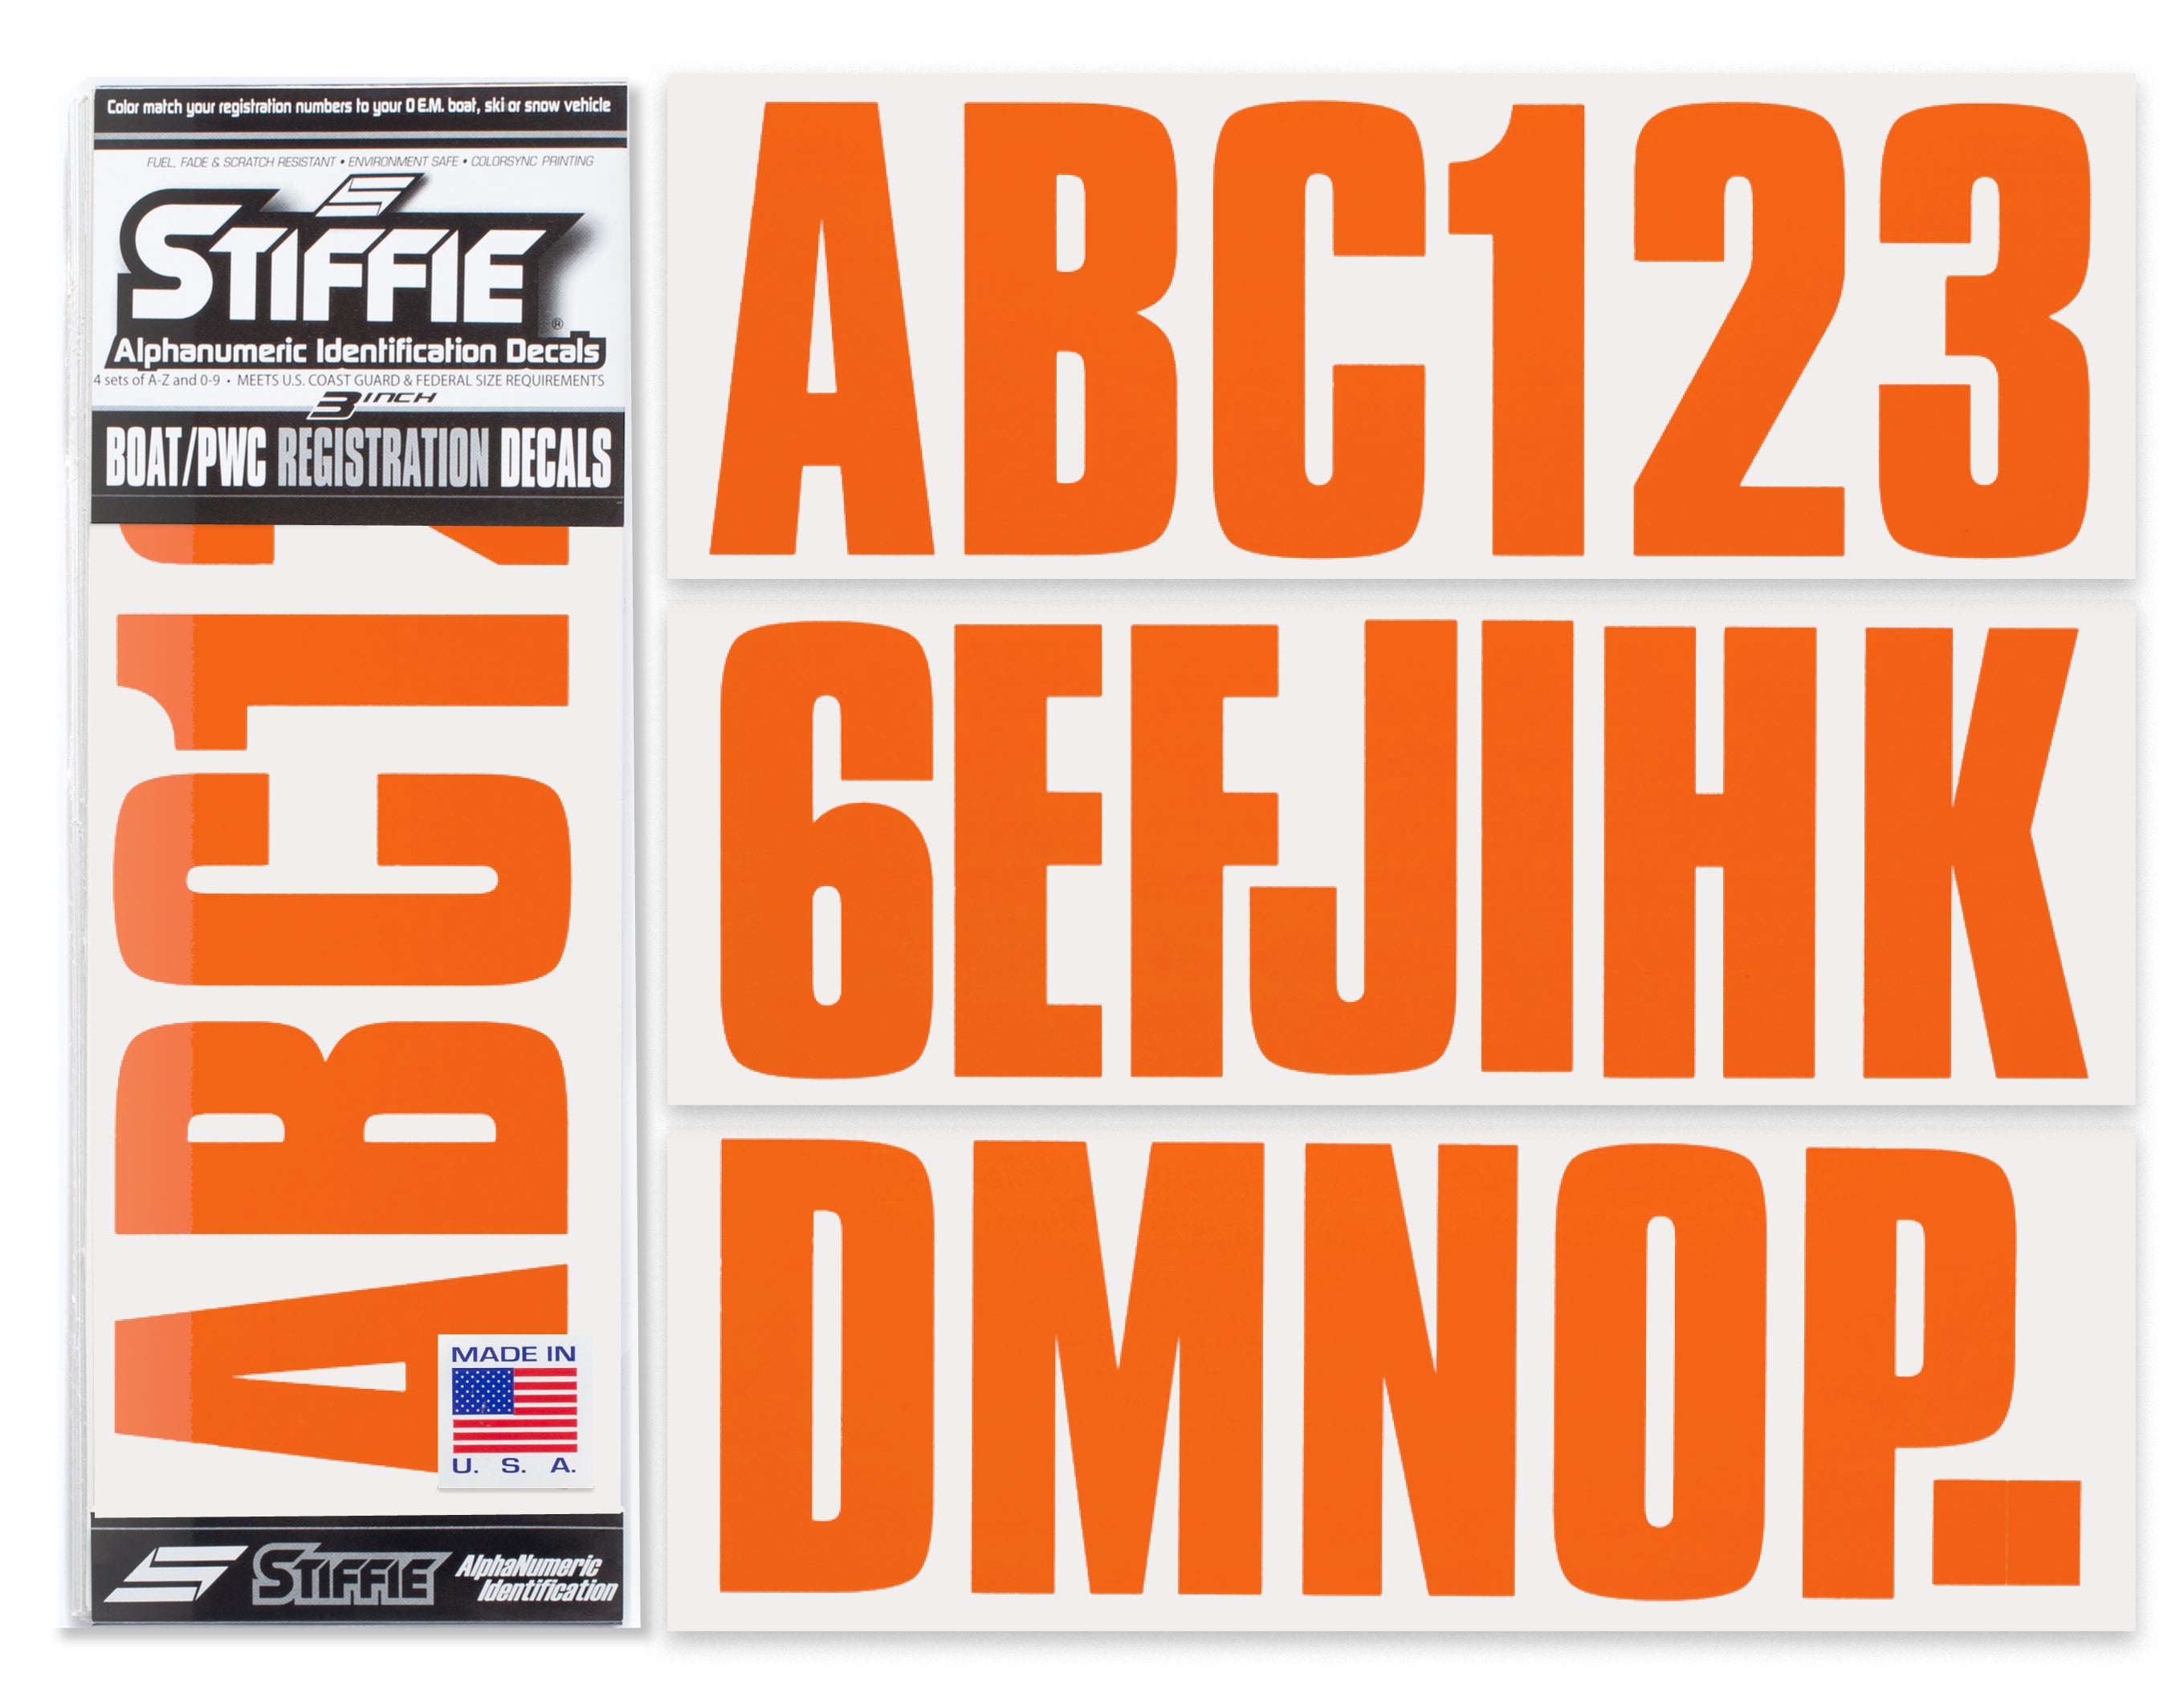 STIFFIE Uniline Orange 3" ID Kit Alpha-Numeric Registration Identification Numbers Stickers Decals for Boats & Personal Watercraft